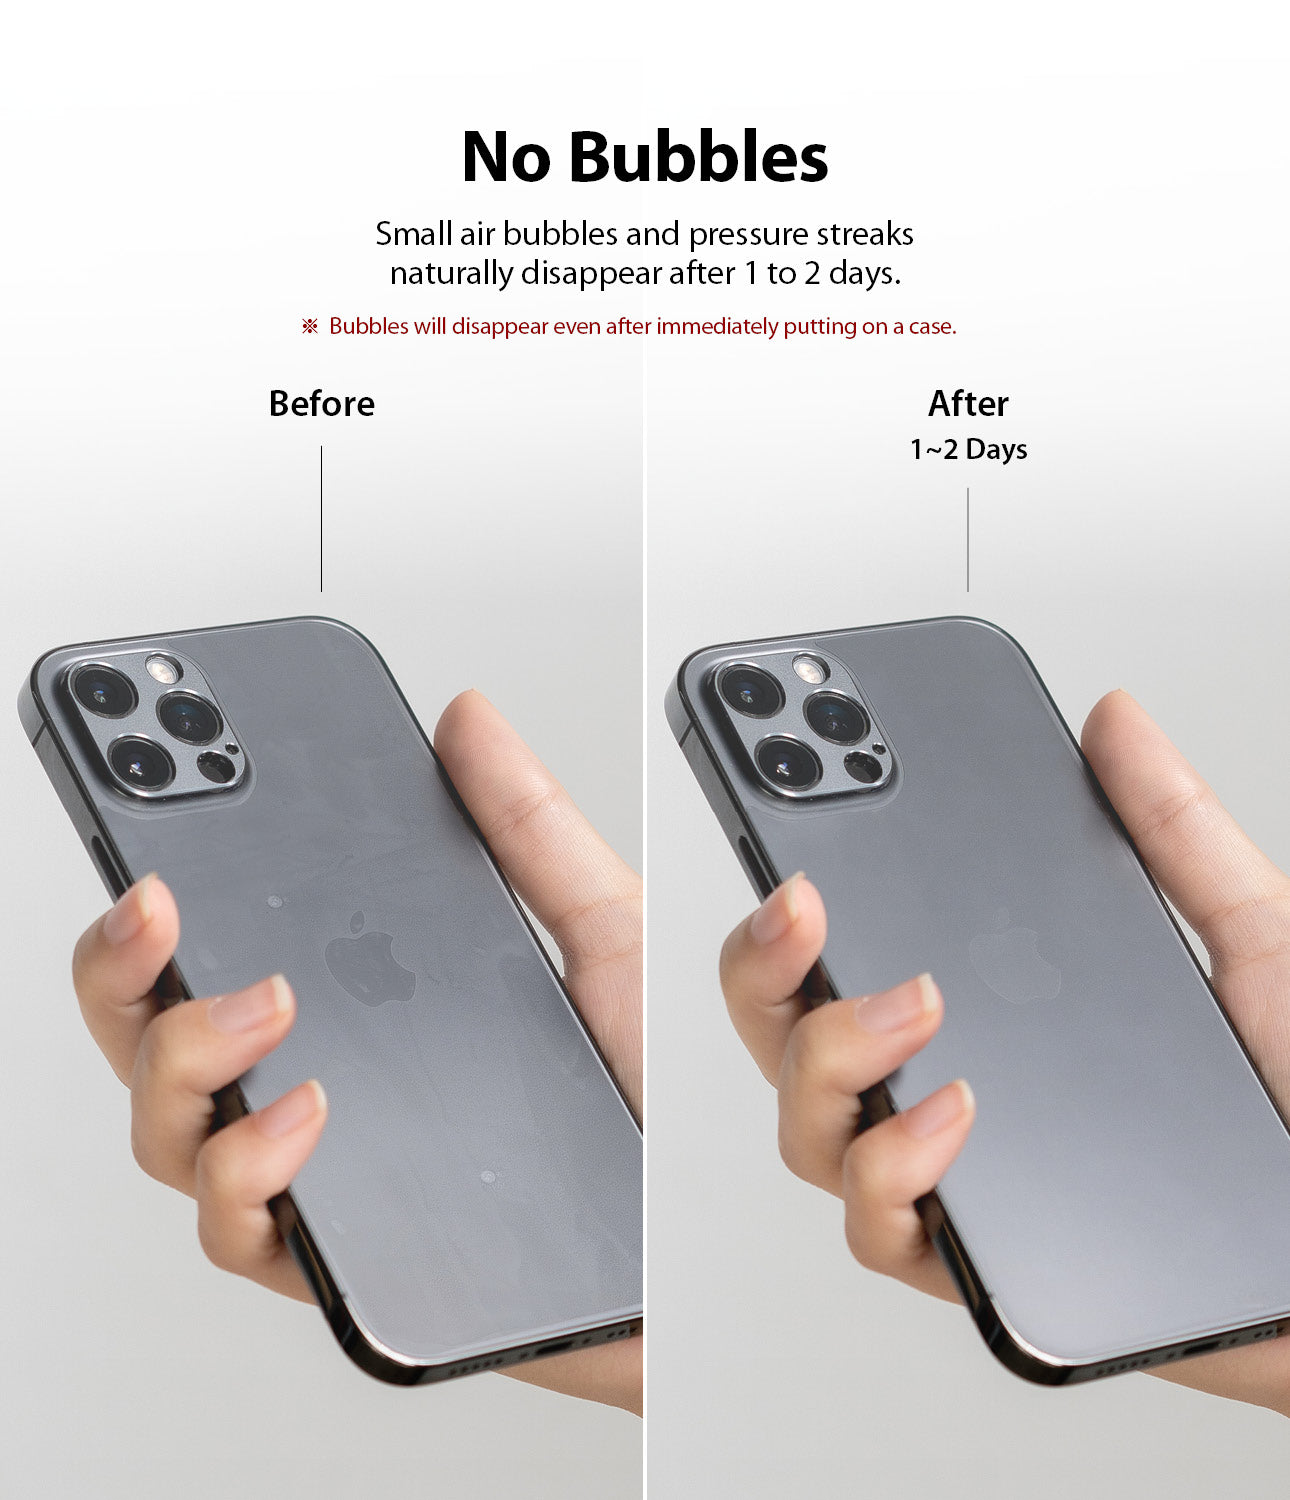 small air bubbles and pressure streaks disappears in 48 hours